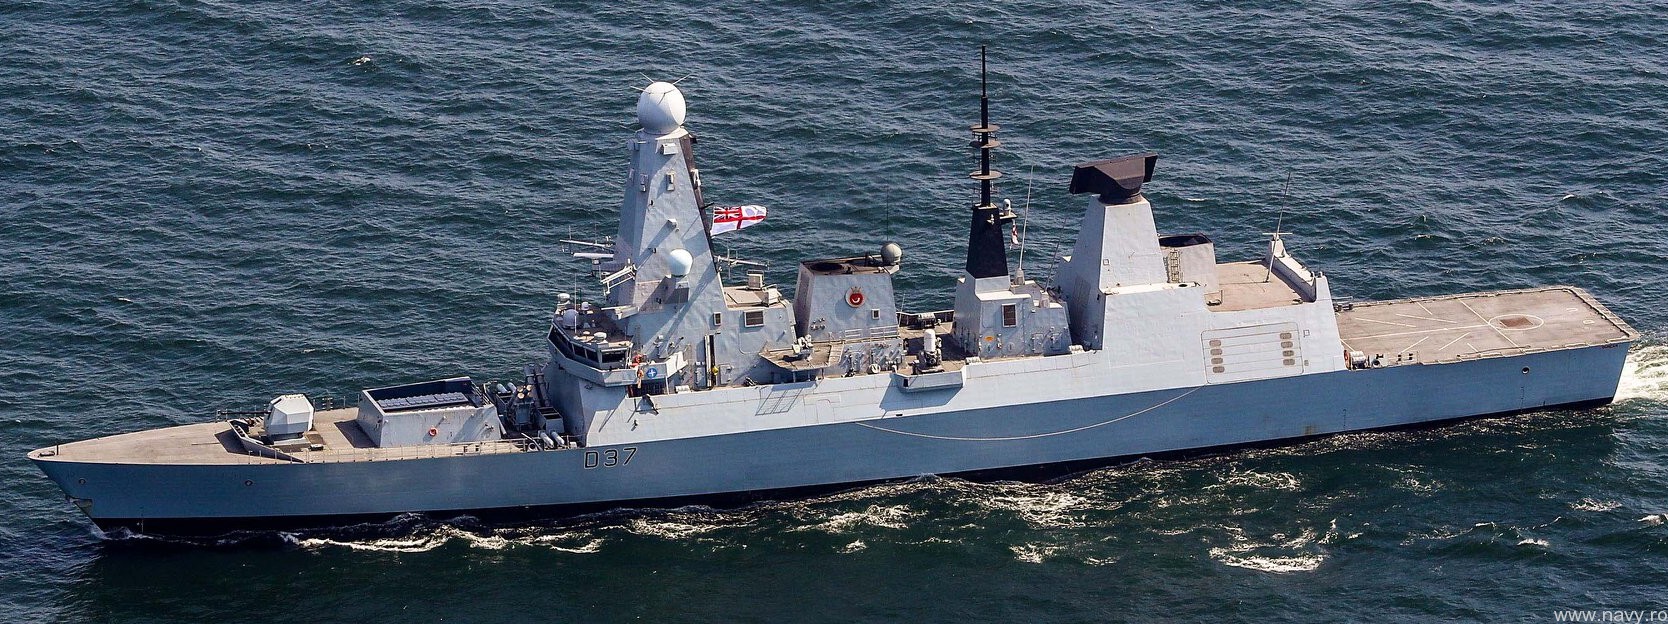 hms duncan d-37 type 45 daring class guided missile destroyer ddg royal navy sea viper paams 43